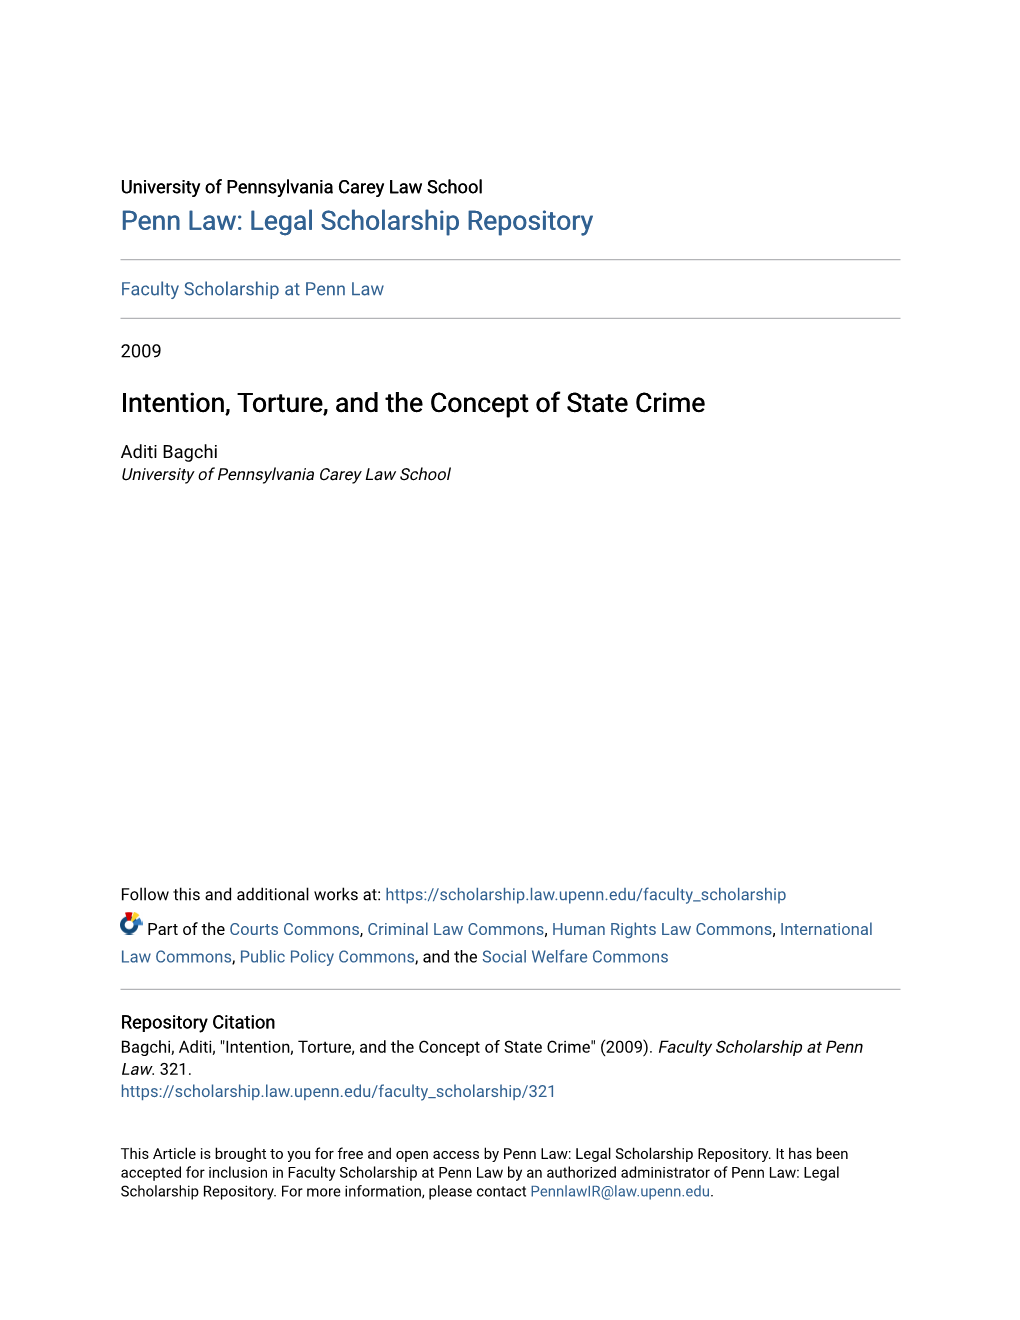 Intention, Torture, and the Concept of State Crime